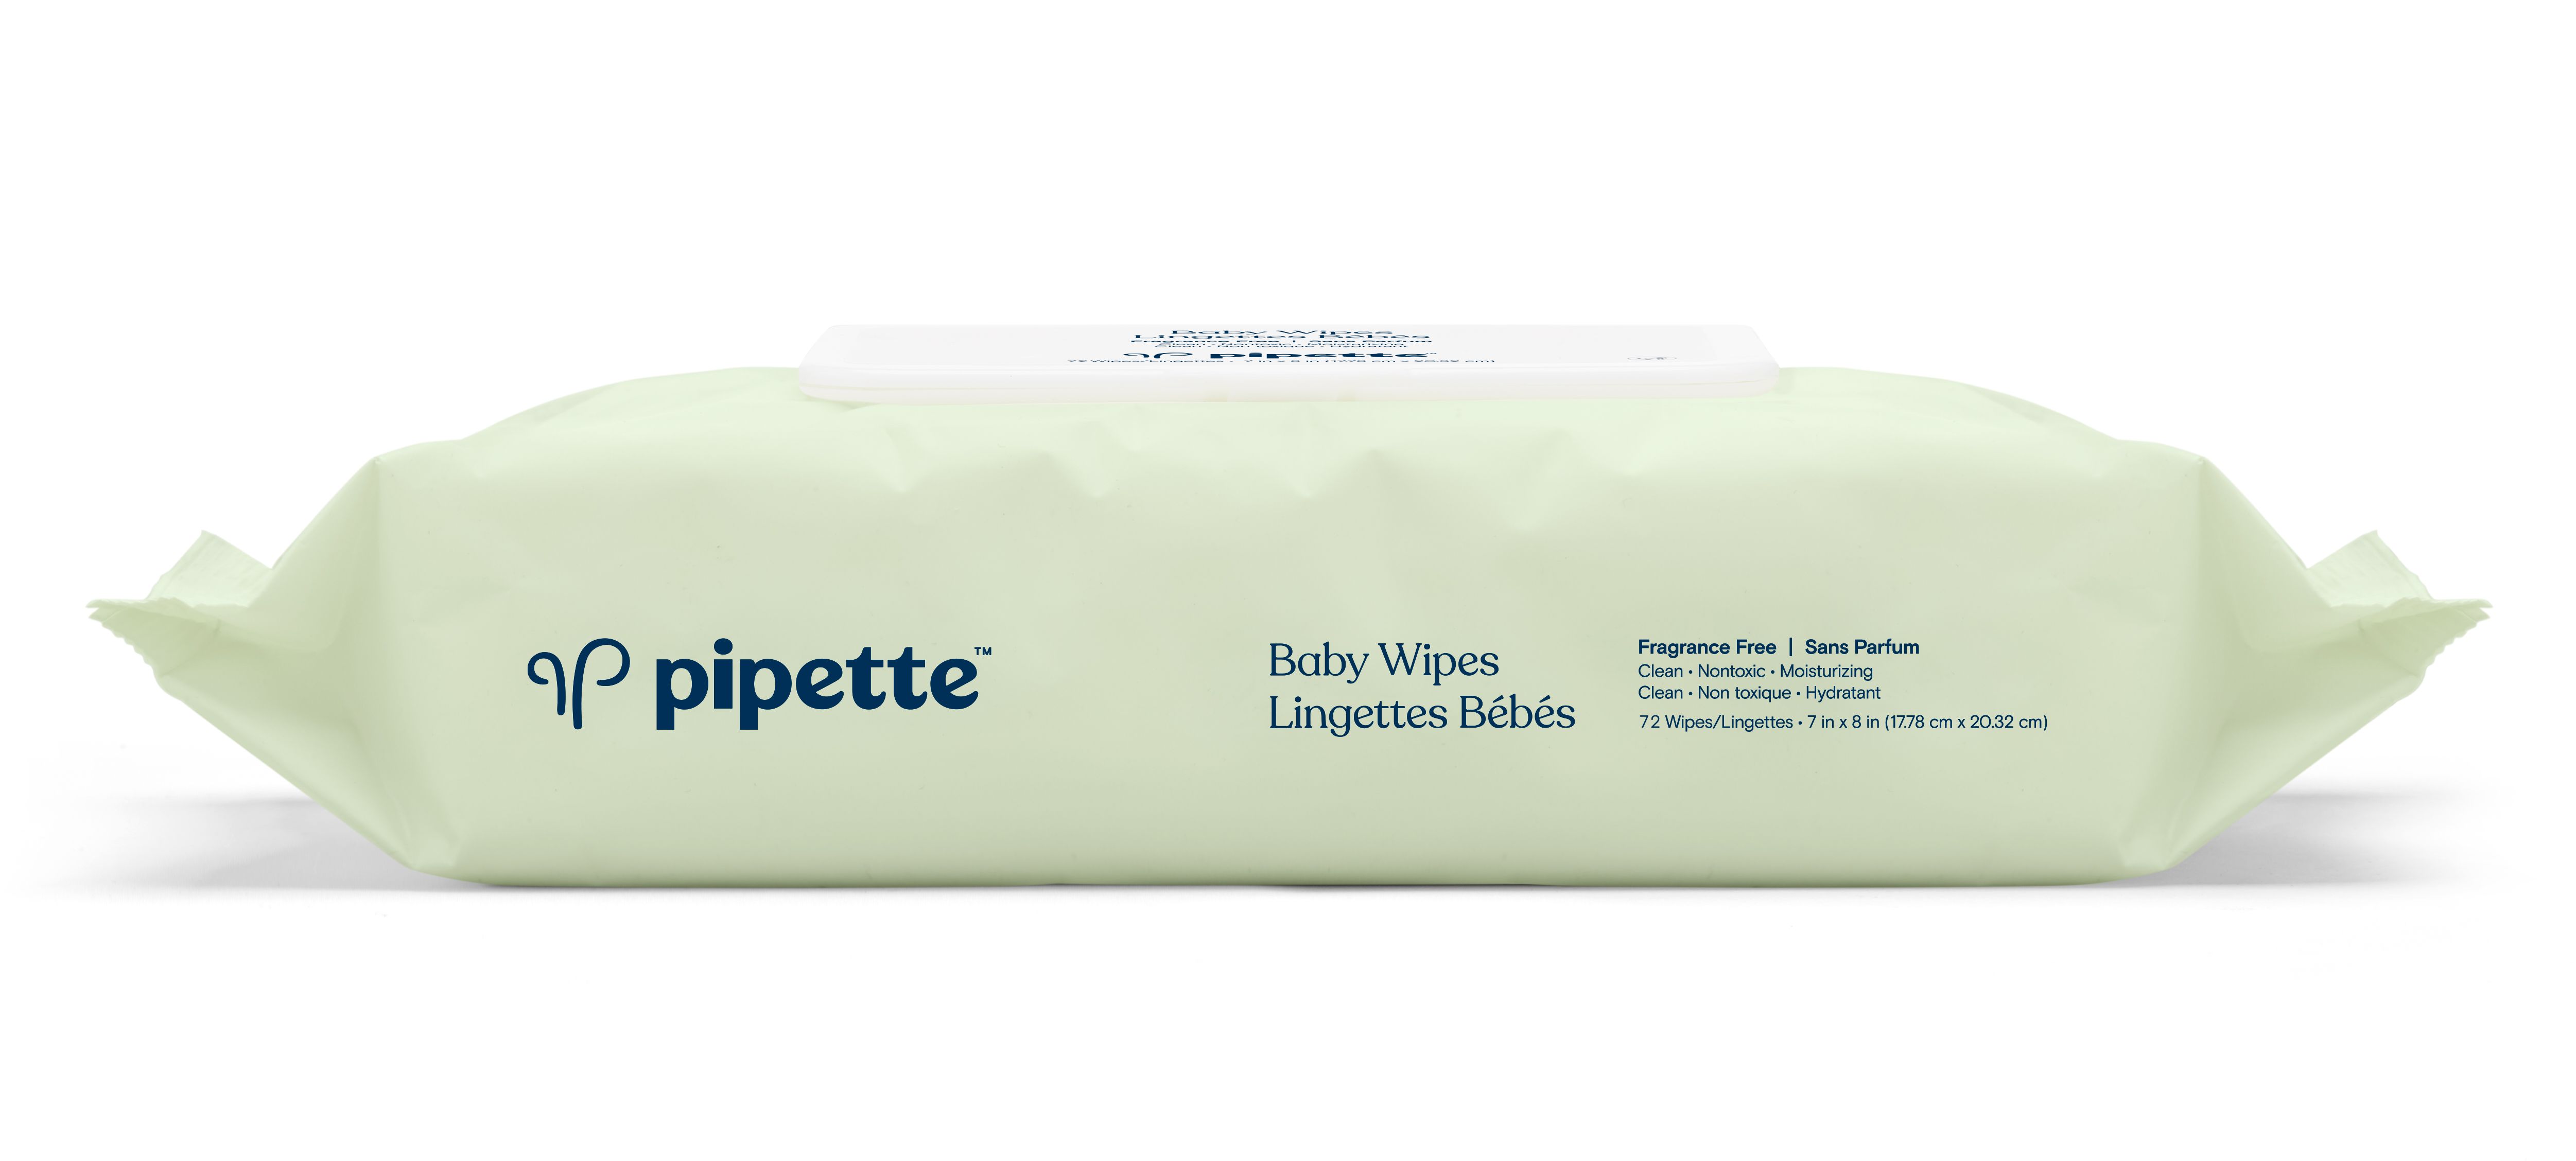 Pipette Baby Wipes, Fragrance Free, 1 Pack - 72 ct